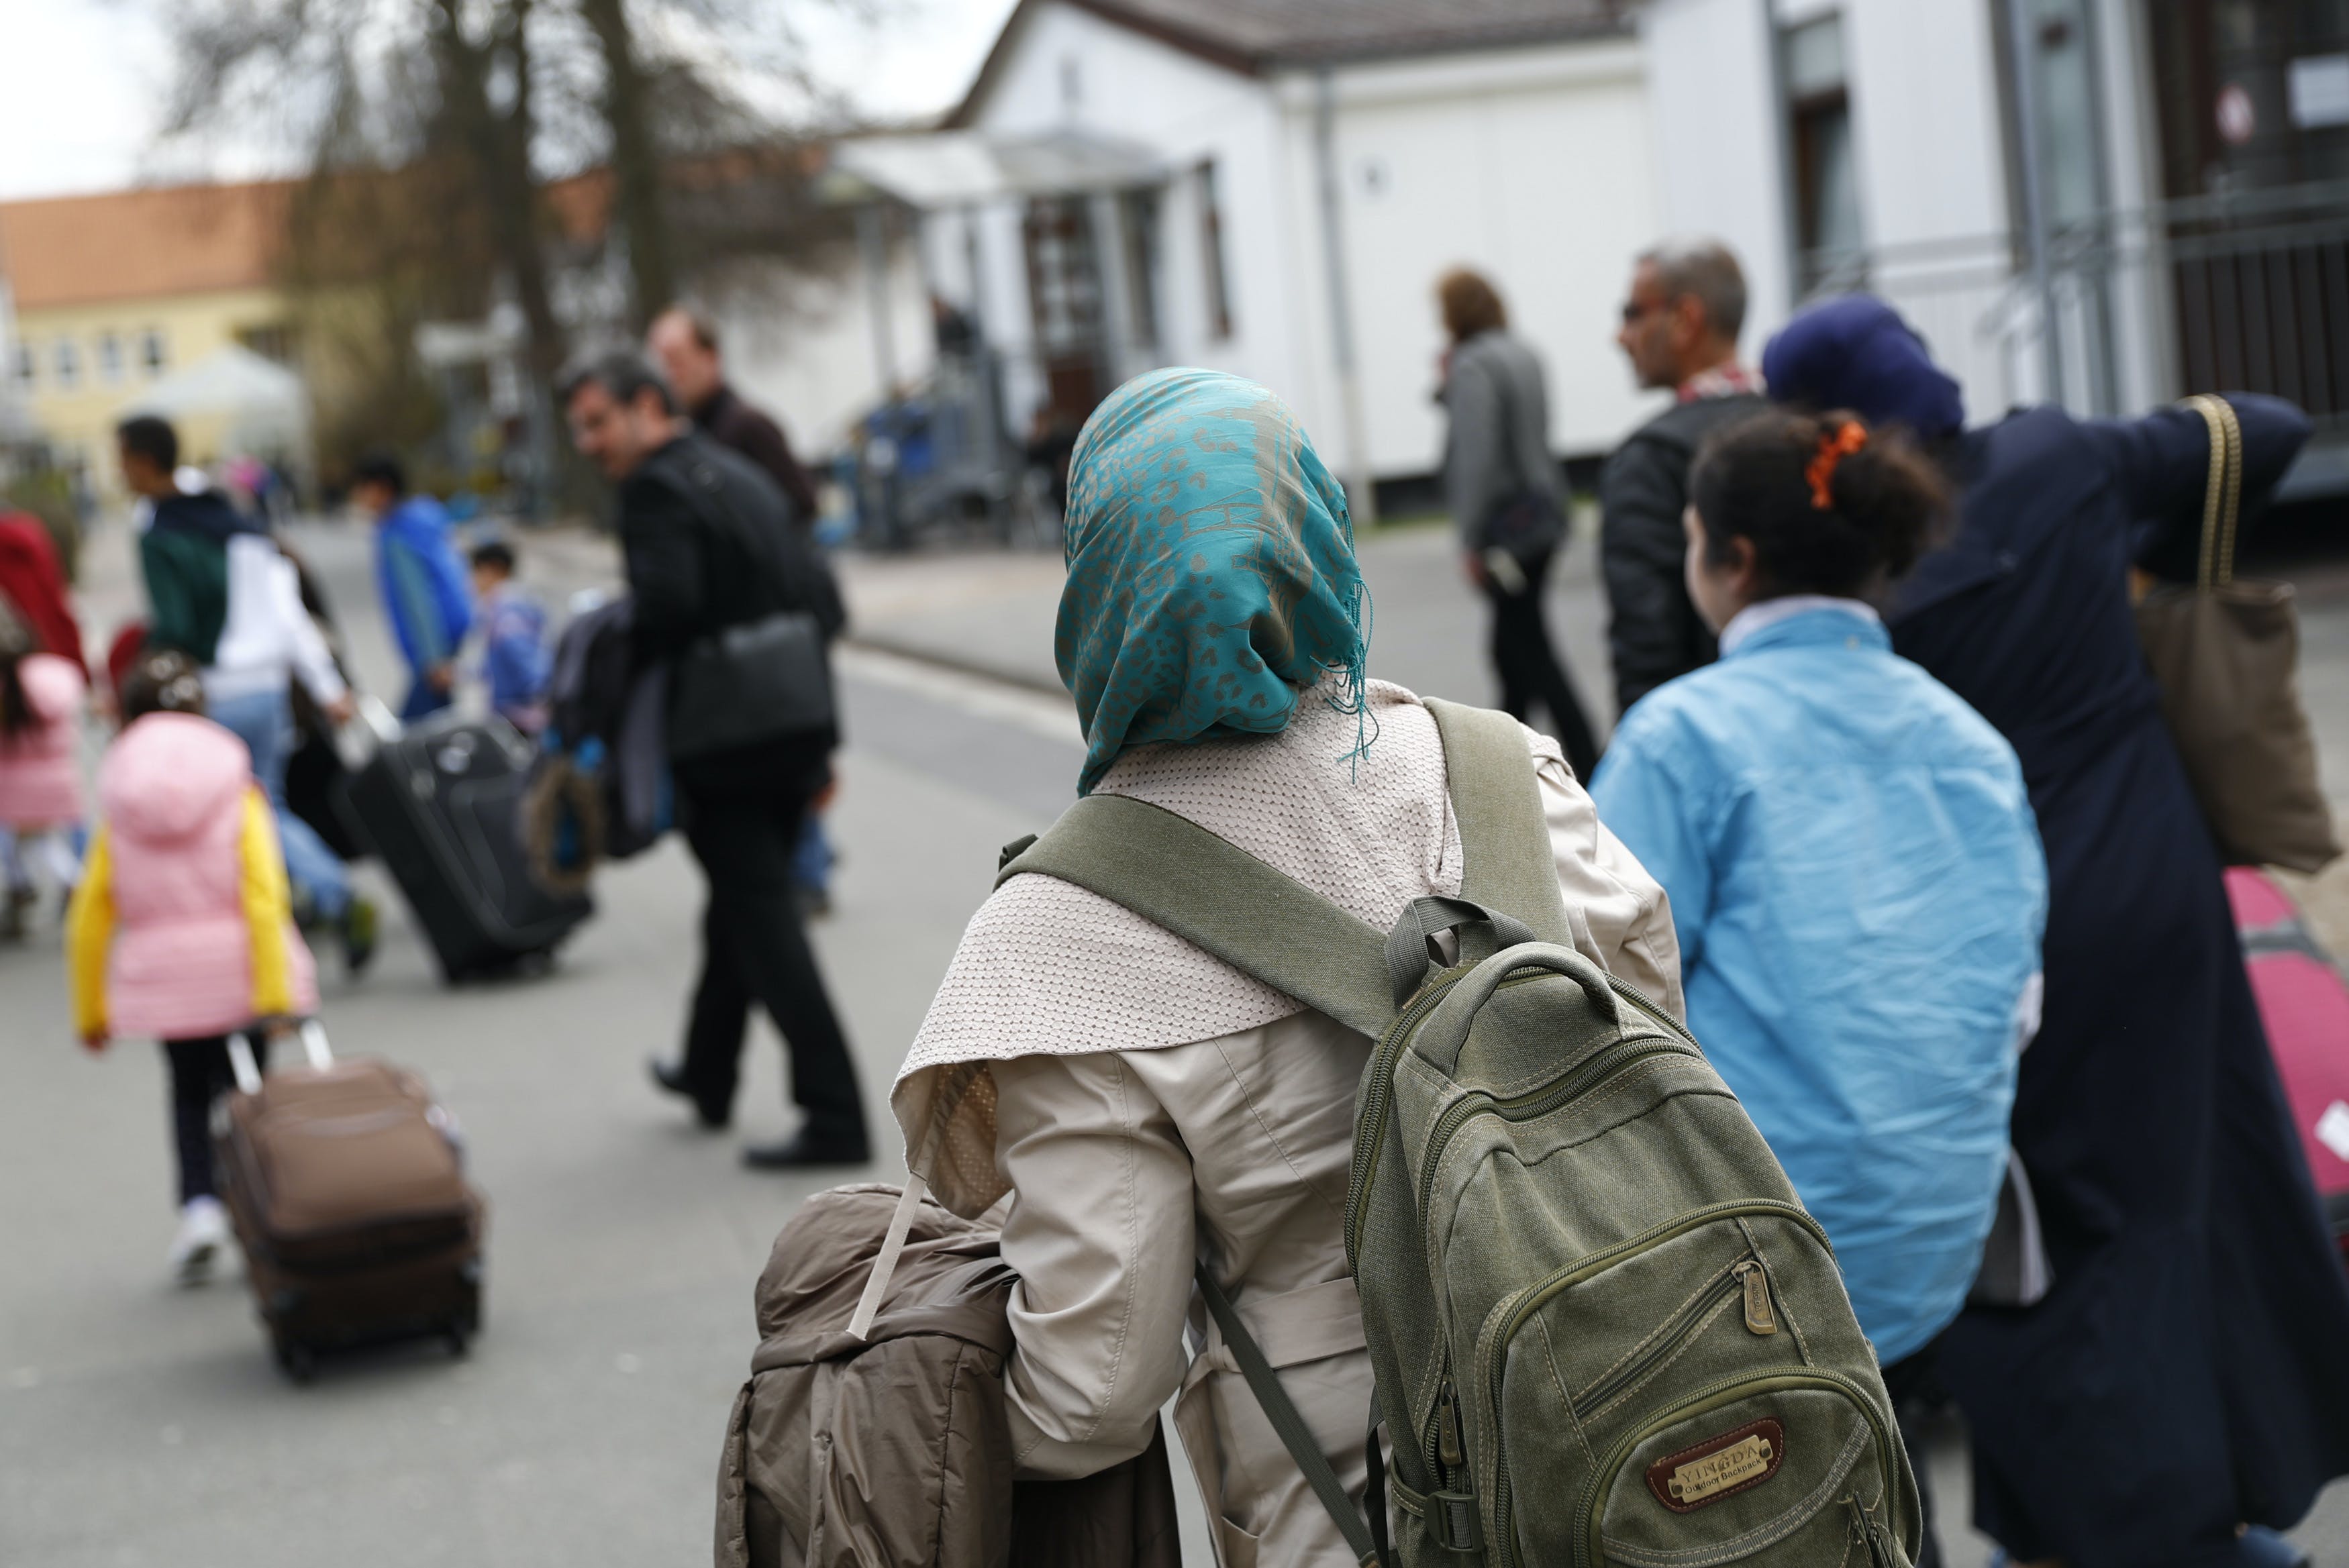 Syrian refugees arrive at the camp for refugees and migrants in Friedland